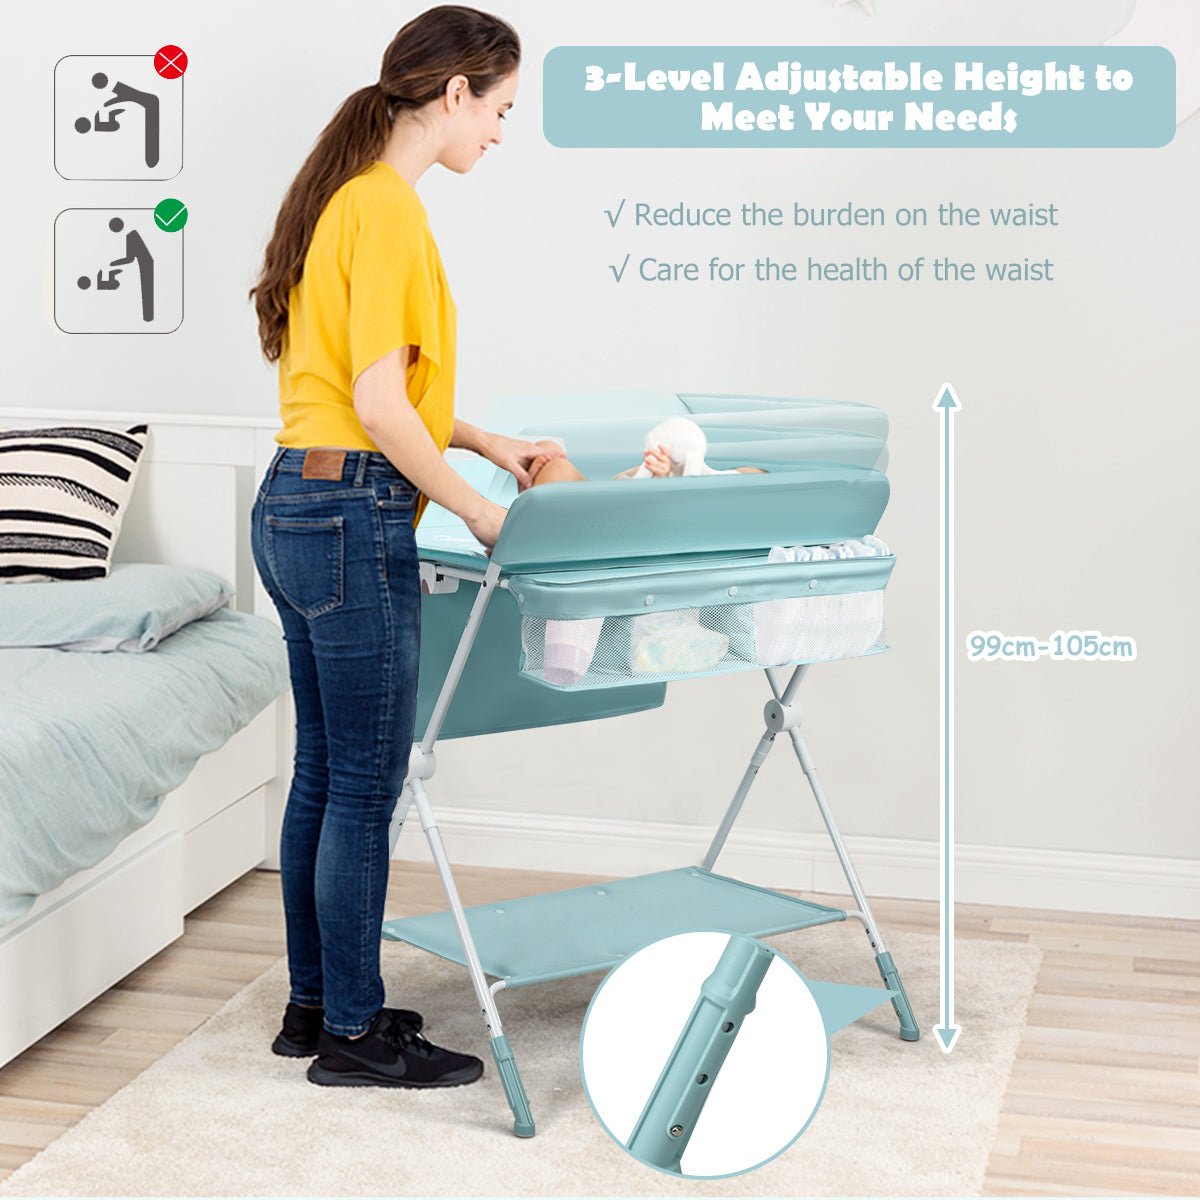 Adaptable Blue Diaper Station - Adjustable Heights for Stress-Free Changing